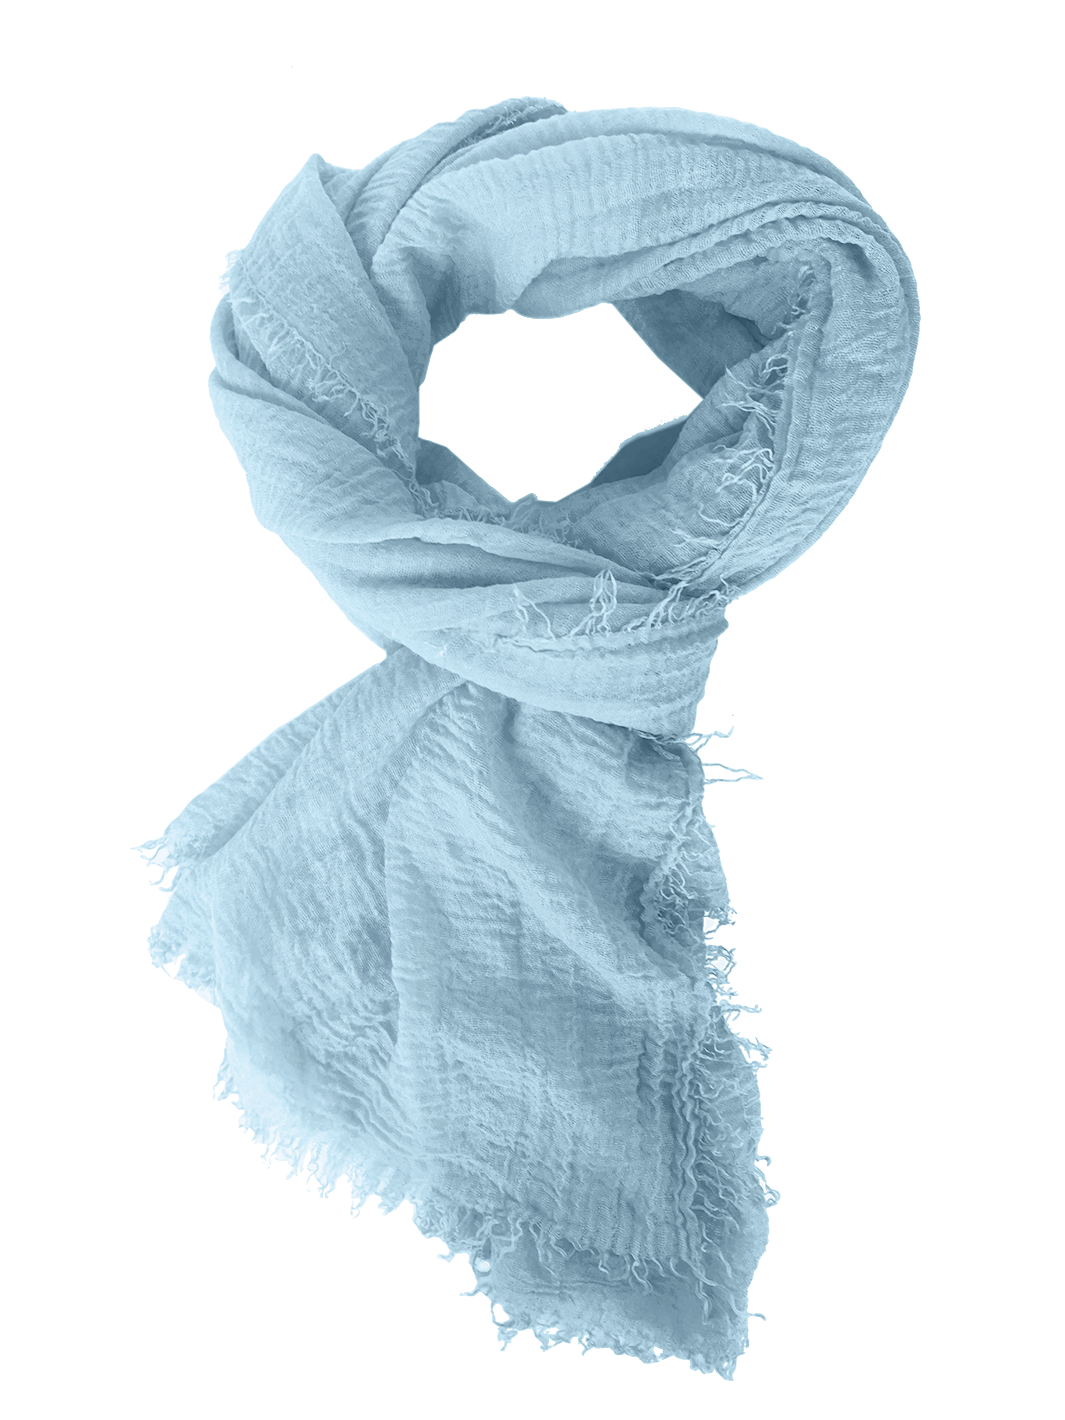 Boho Scarf - Baby Blue - Kingfisher Road - Online Boutique